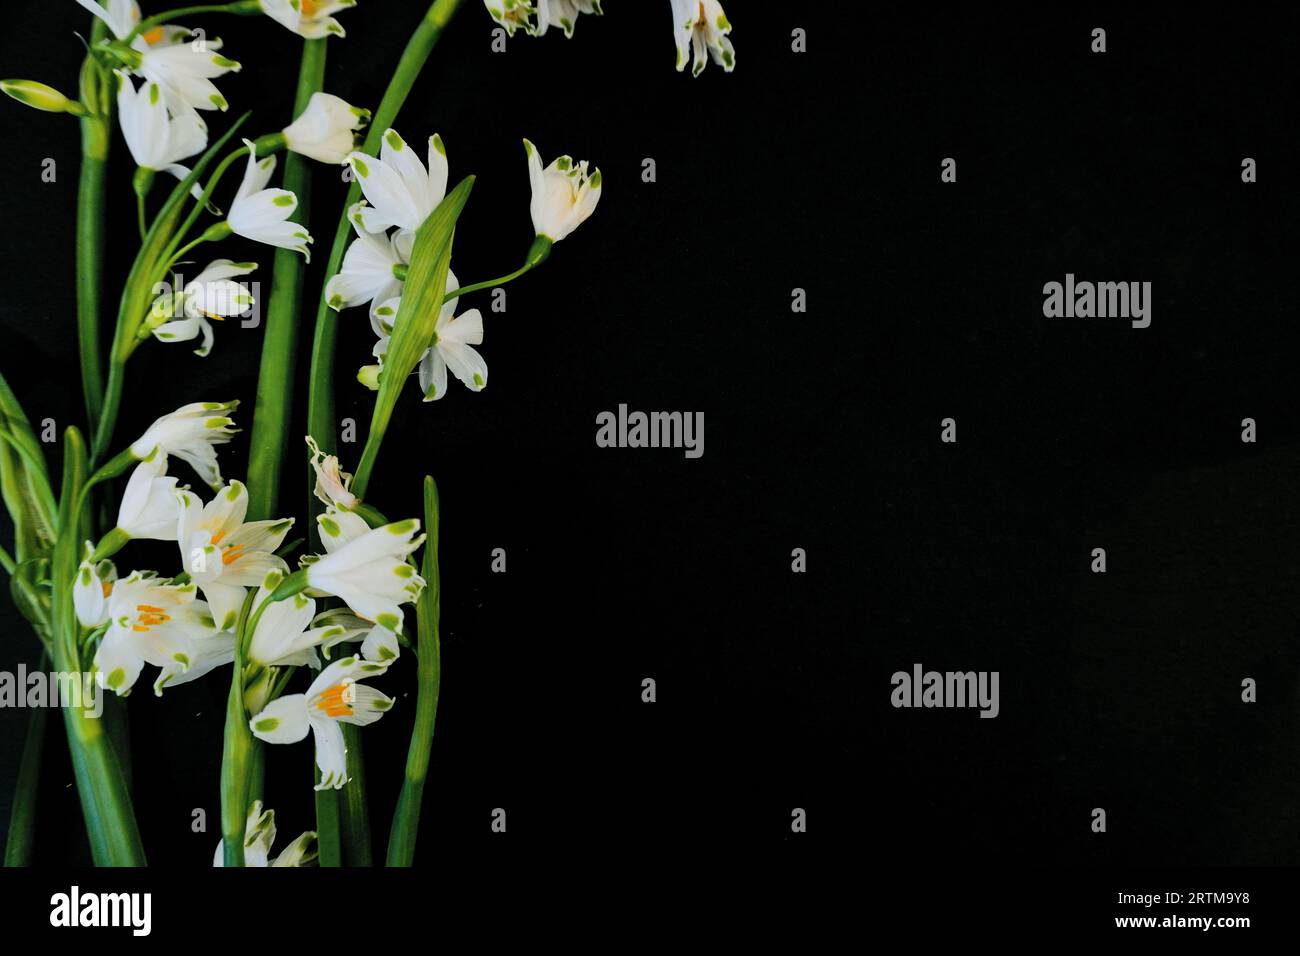 Flat Lay, postcard for death, funeral. White snowdrop flowers on black background Stock Photo